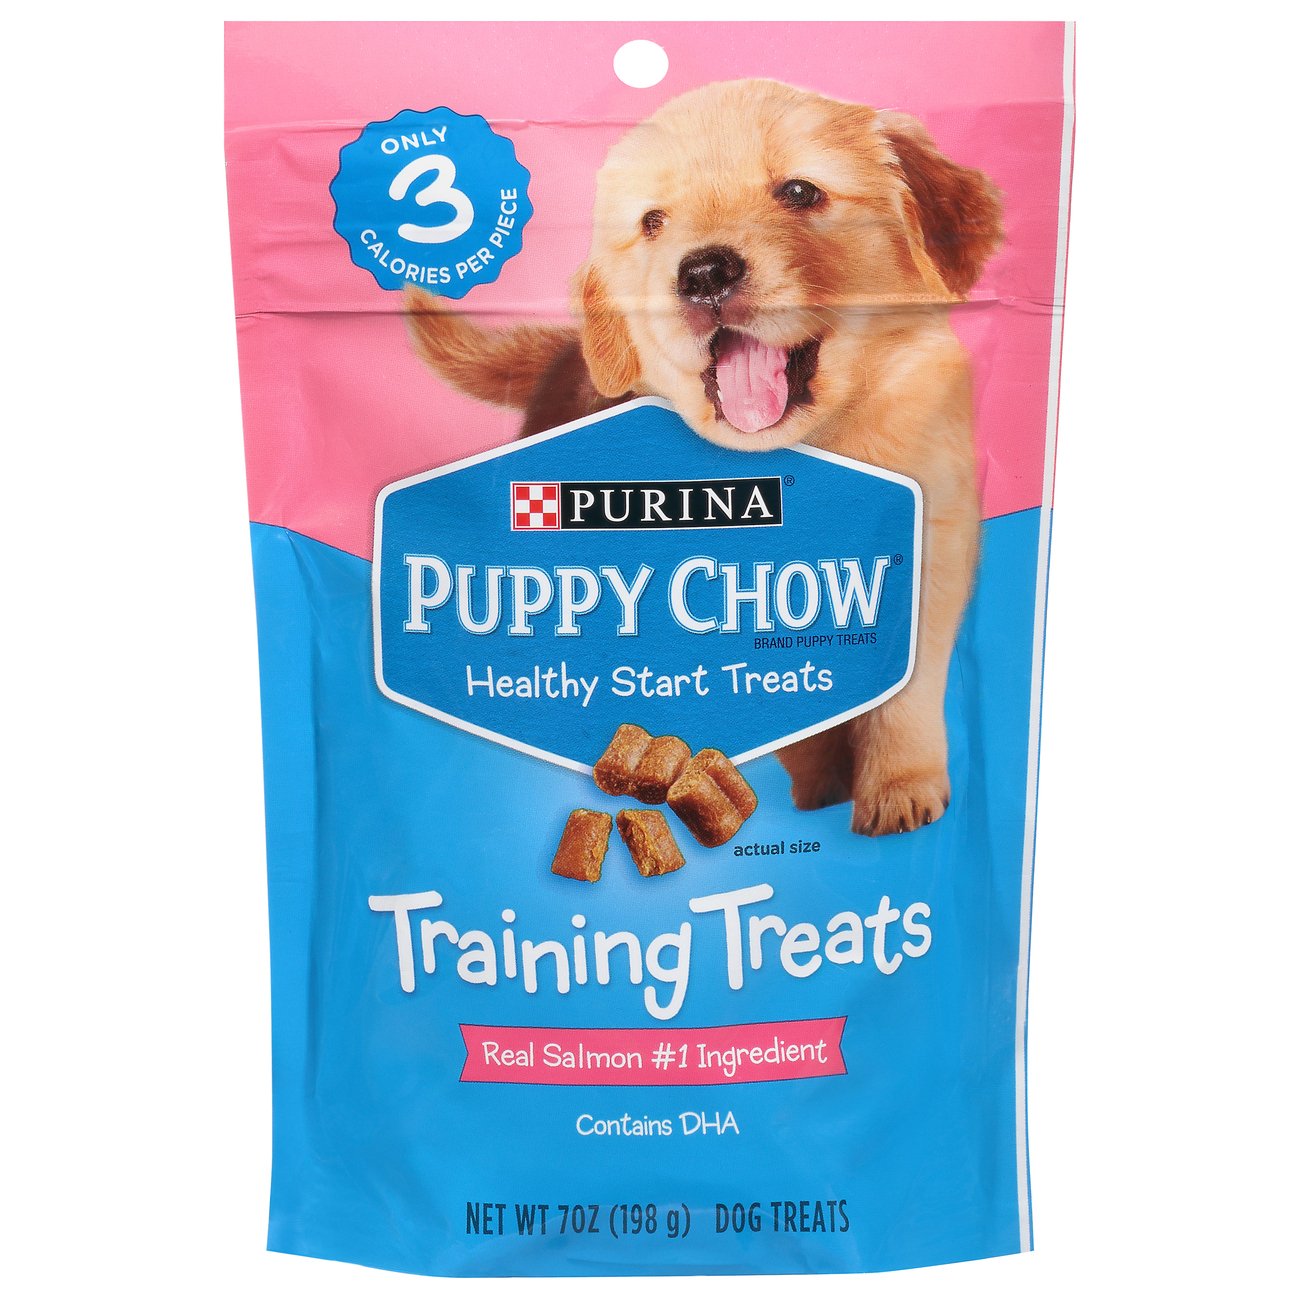 what is the best treat for dog training